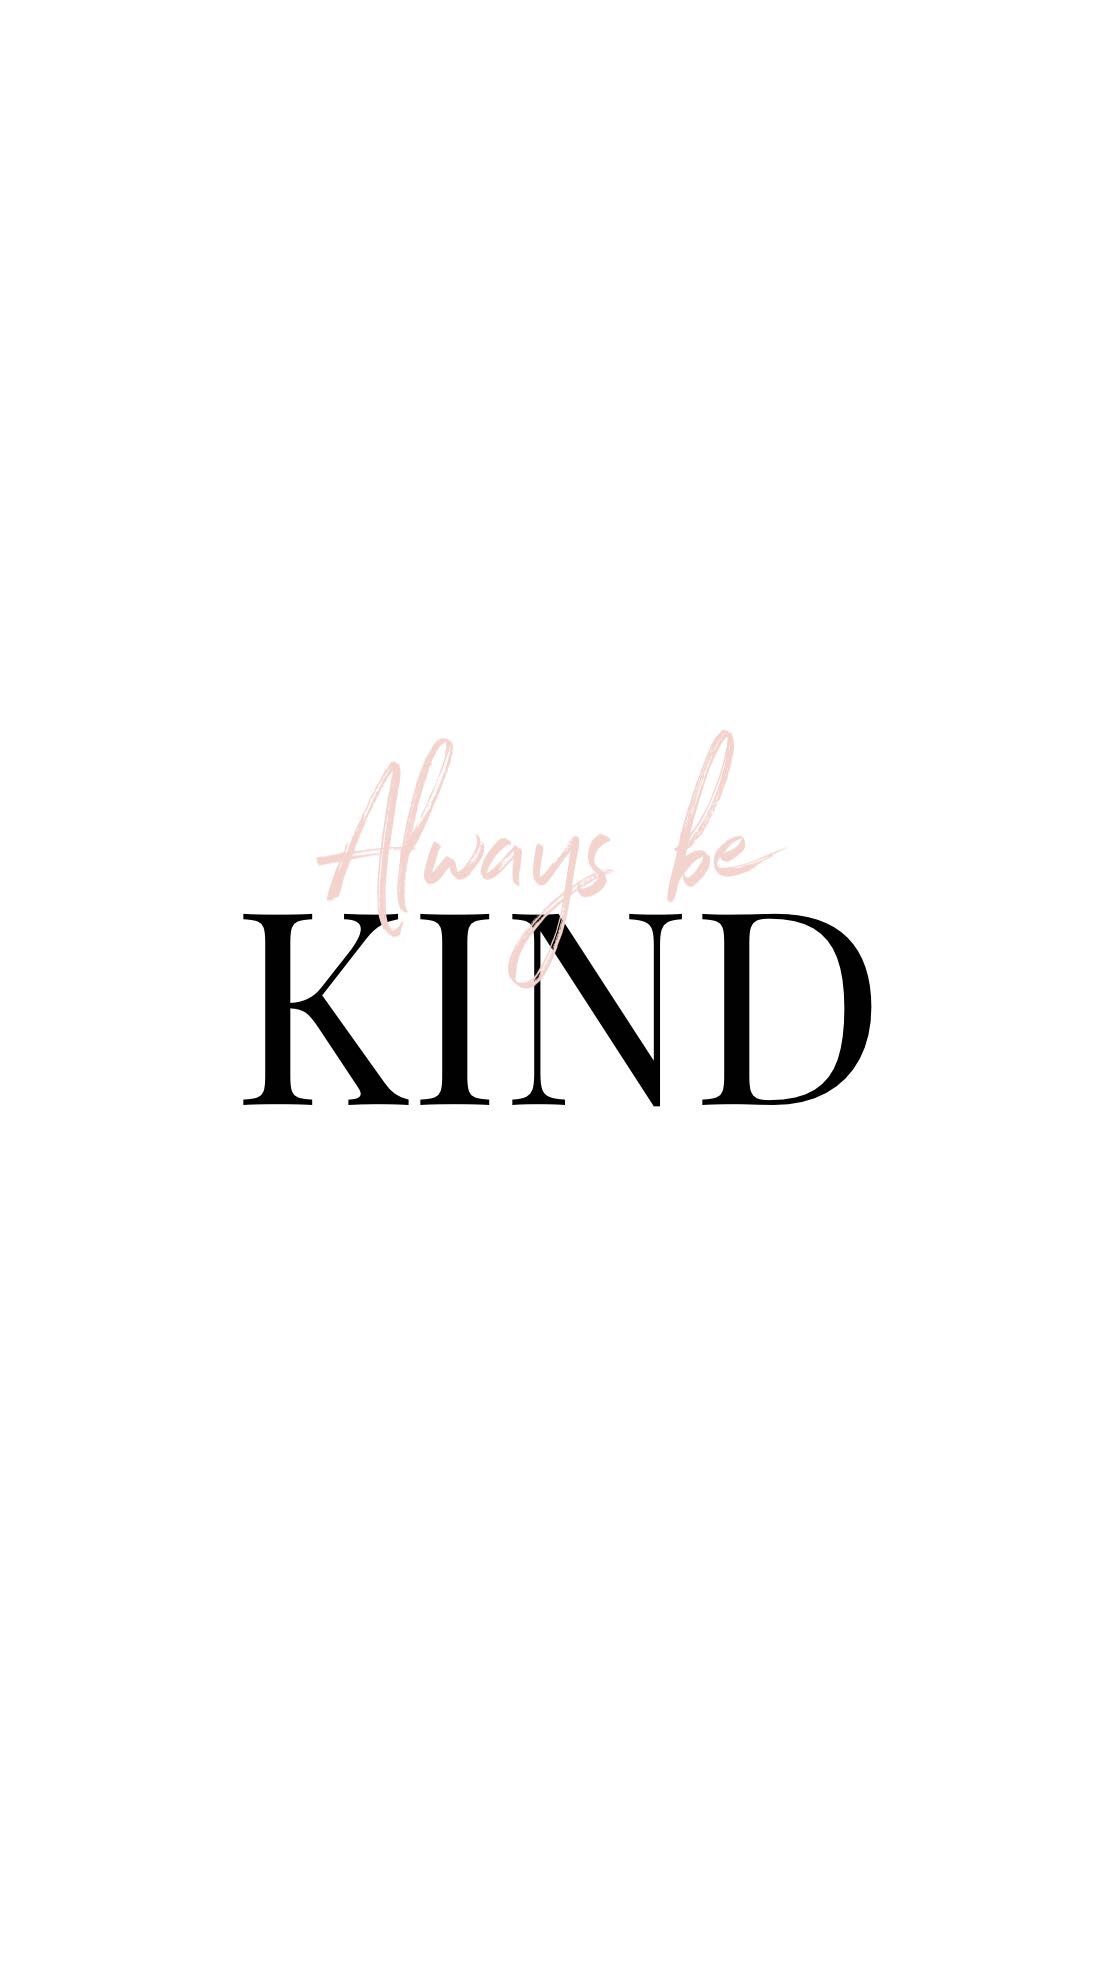 Always be kind // iPhone wallpaper // phone background. Phone